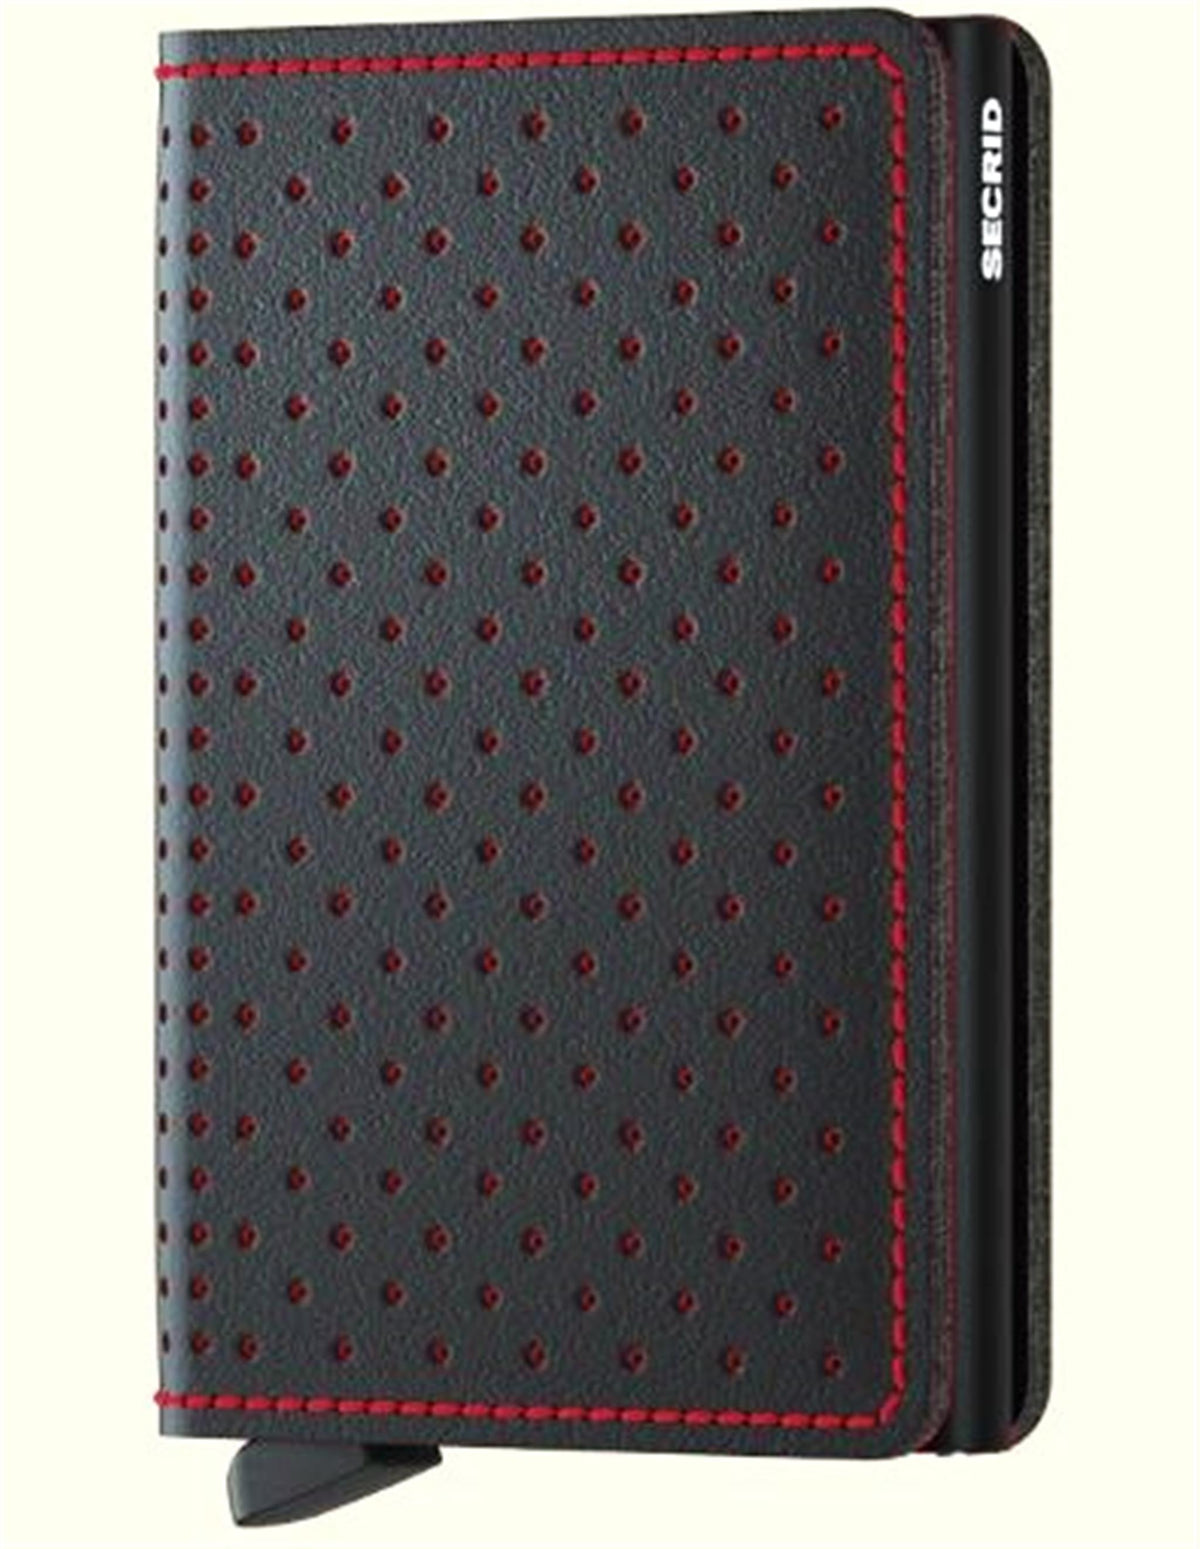 Secrid Slim Wallet - Perforated Collection - Red-Black